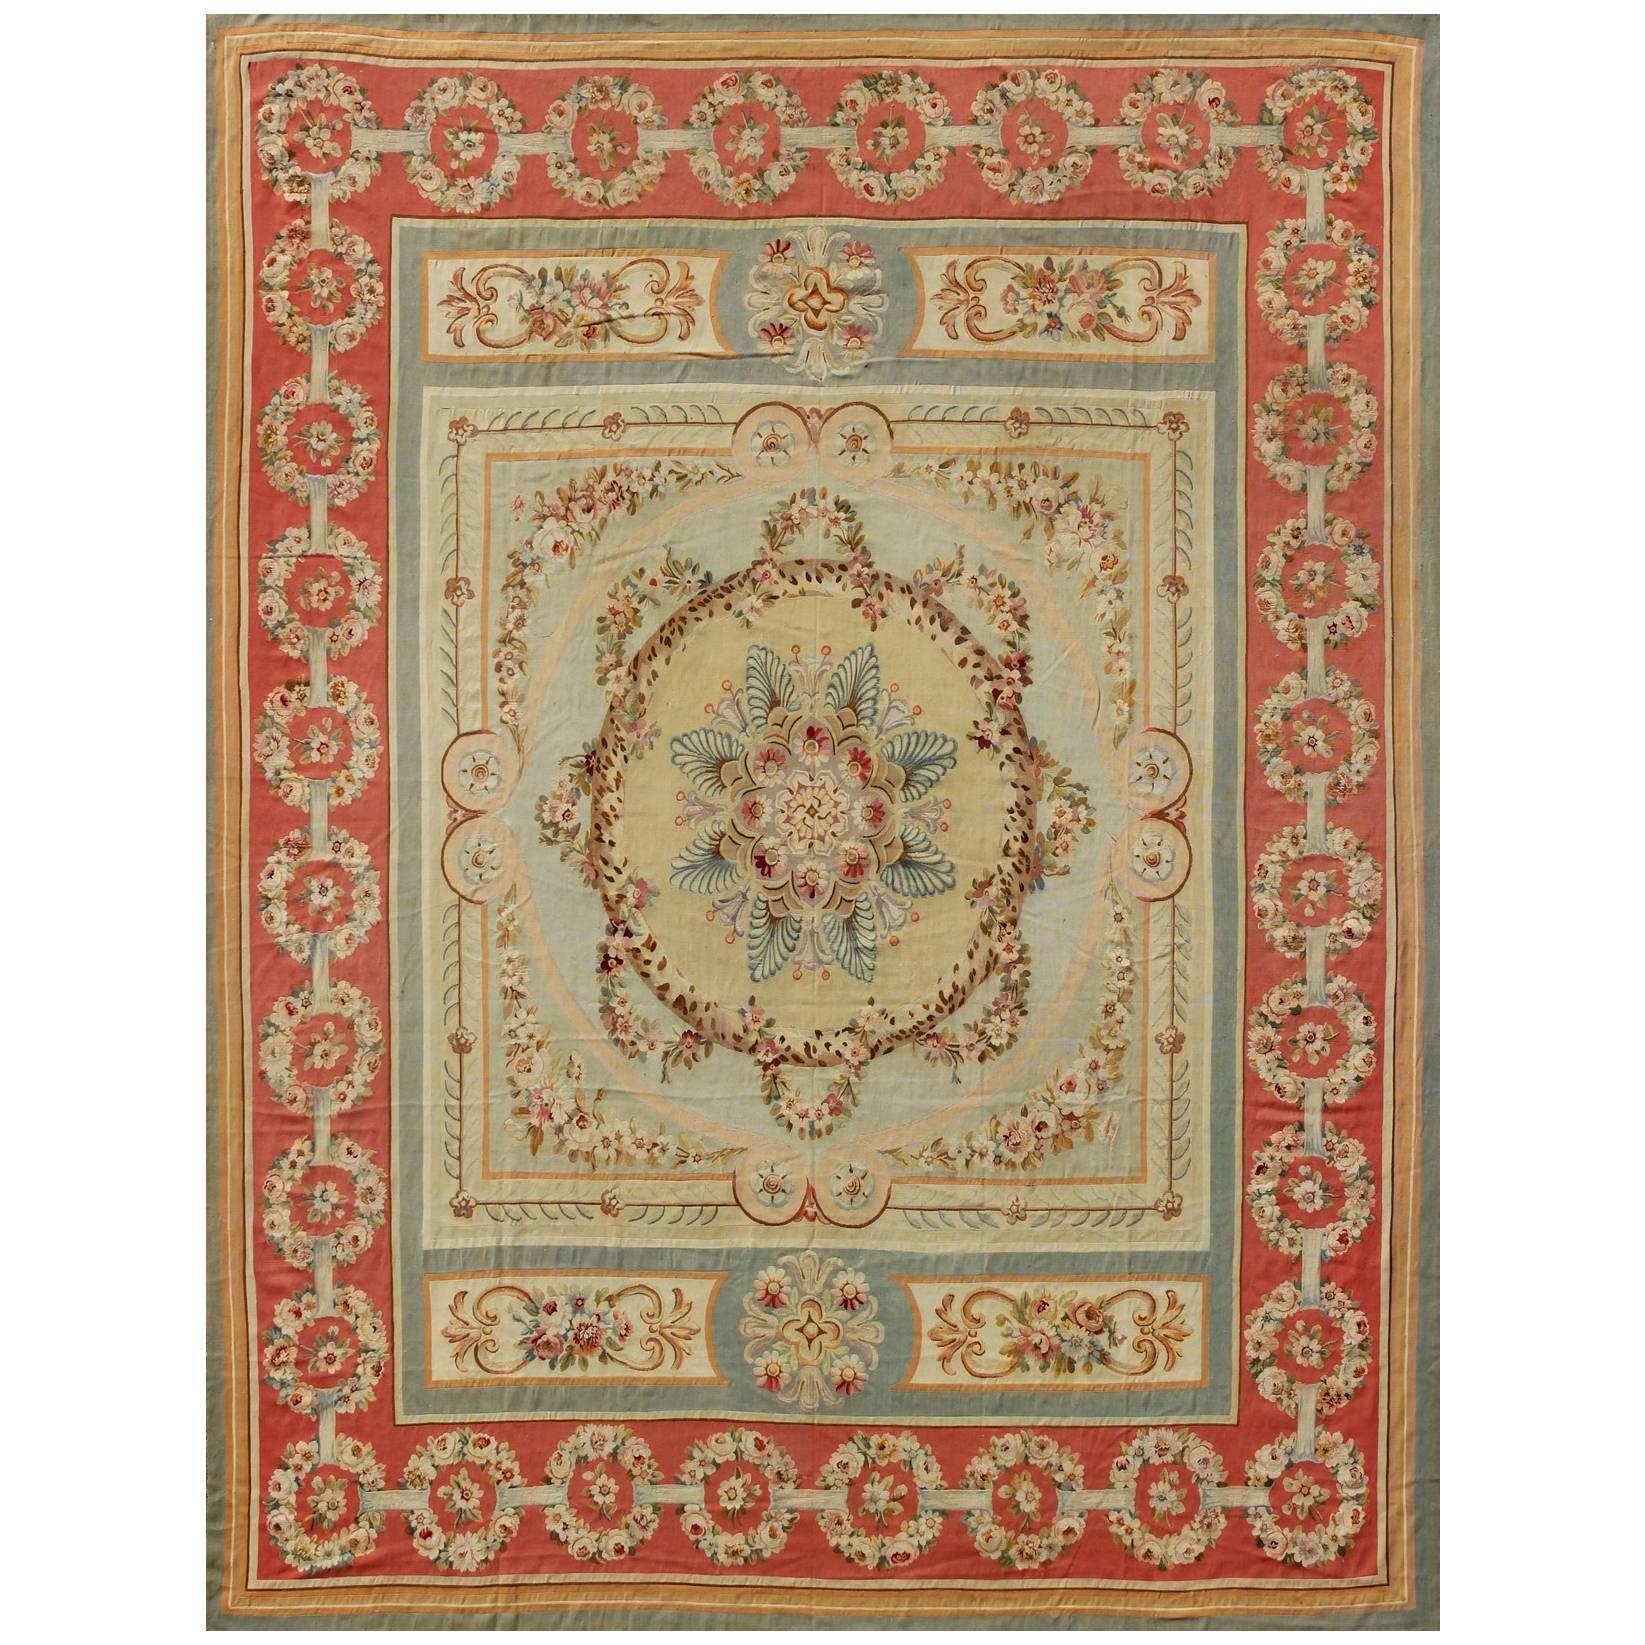 Gorgeous Antique French Aubusson Medallion Carpet with Garlands of Roses 